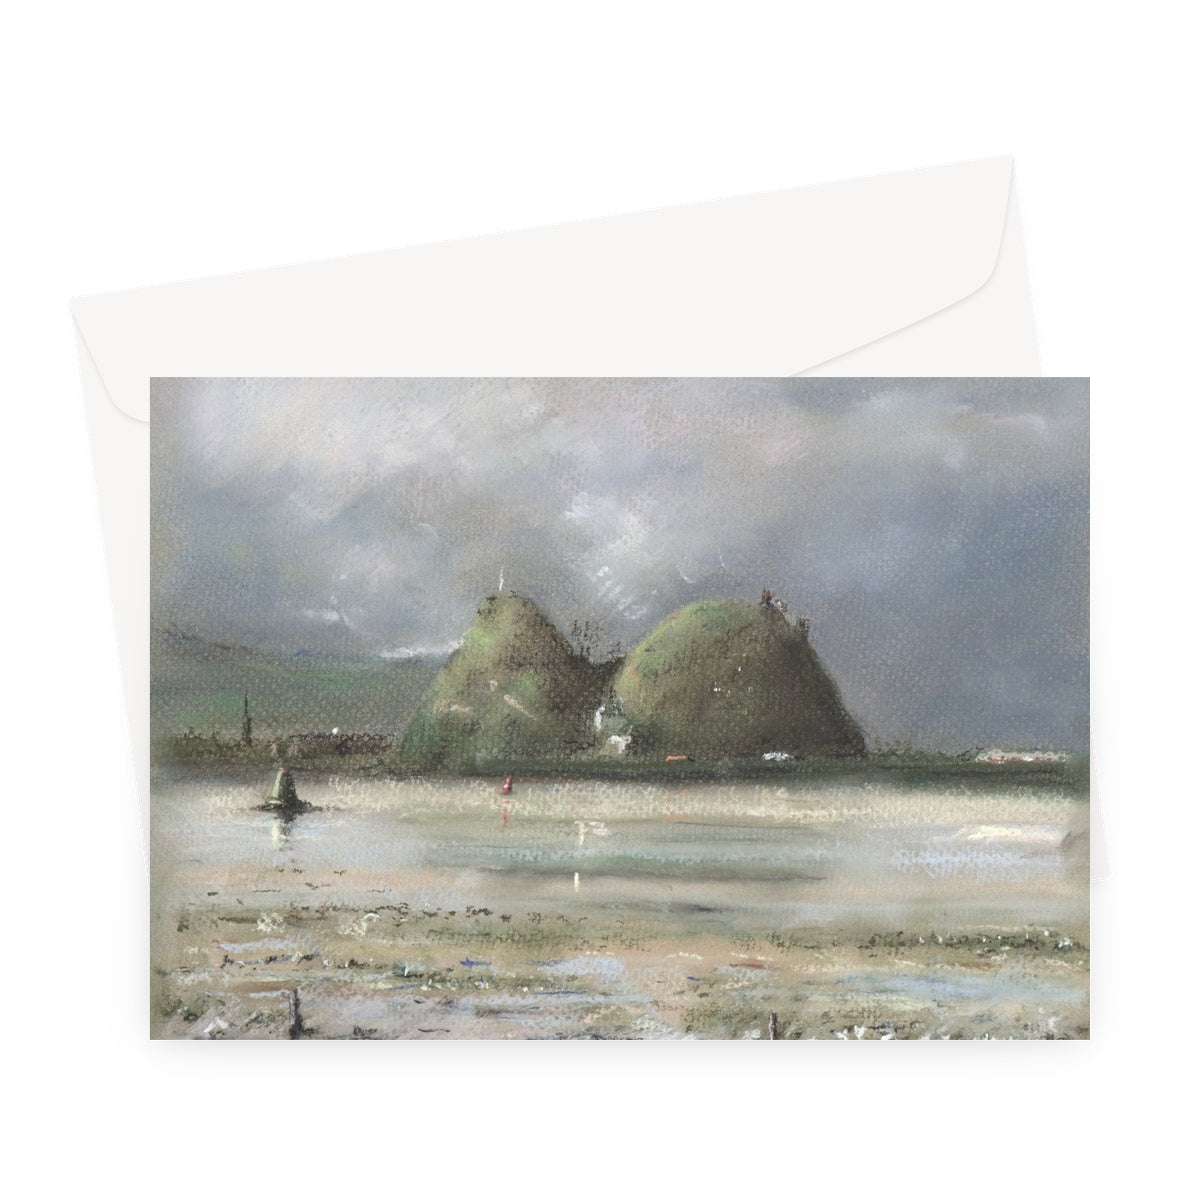 Dumbarton Rock Art Gifts Greeting Card-Greetings Cards-River Clyde Art Gallery-A5 Landscape-1 Card-Paintings, Prints, Homeware, Art Gifts From Scotland By Scottish Artist Kevin Hunter